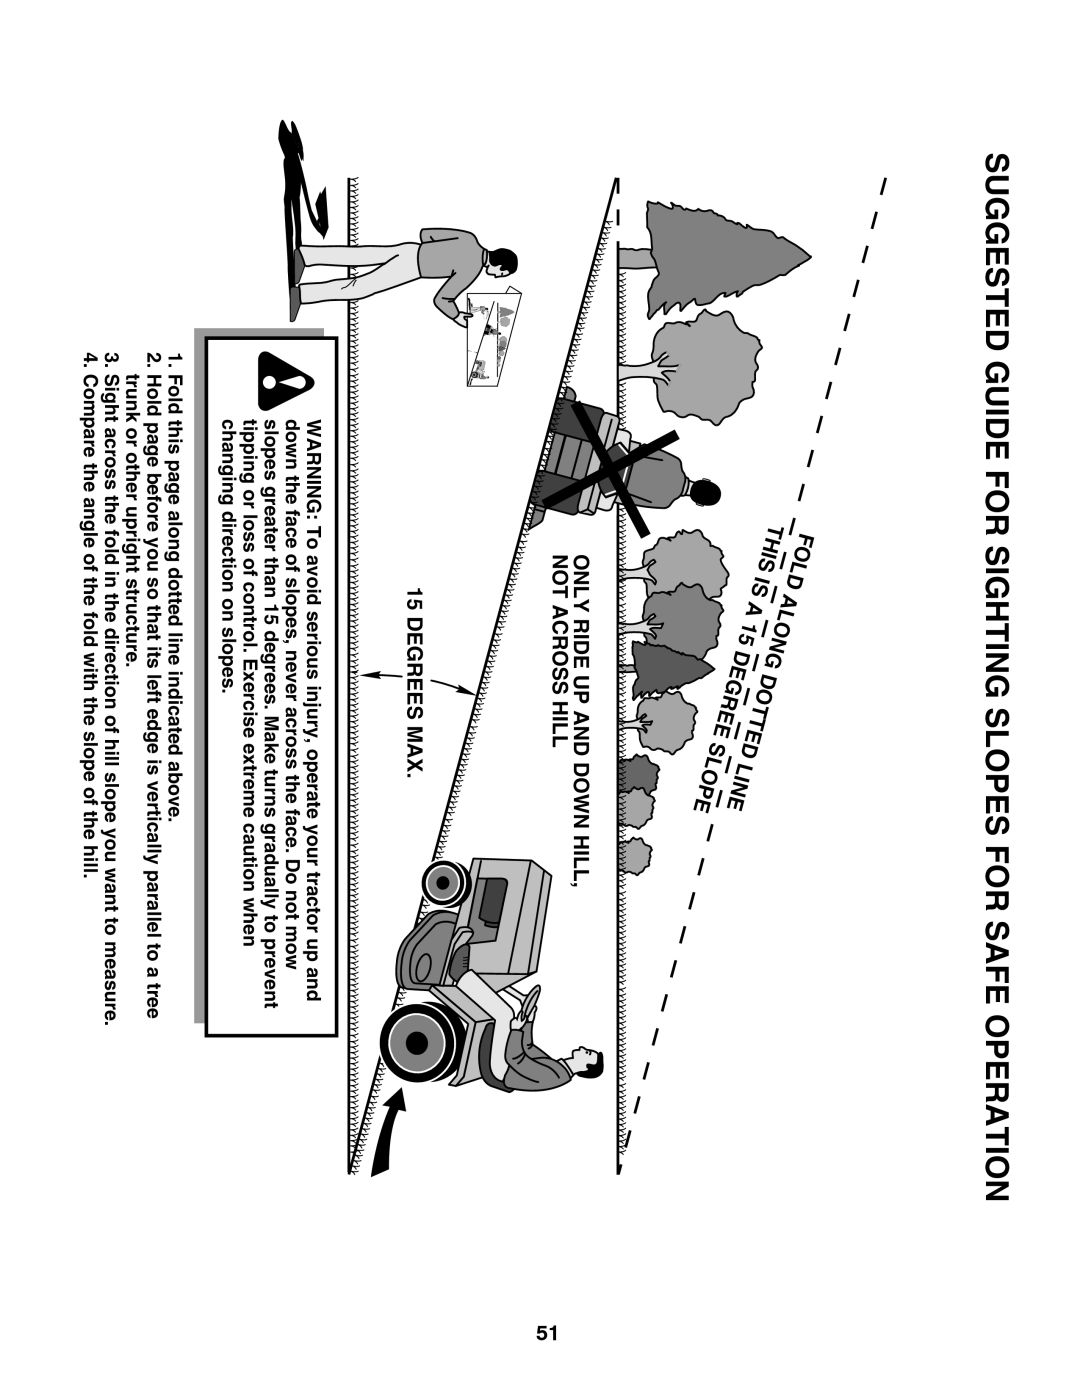 Husqvarna 532 43 38-61, 917.289570 owner manual Suggested Guide For Sighting Slopes For Safe Operation 